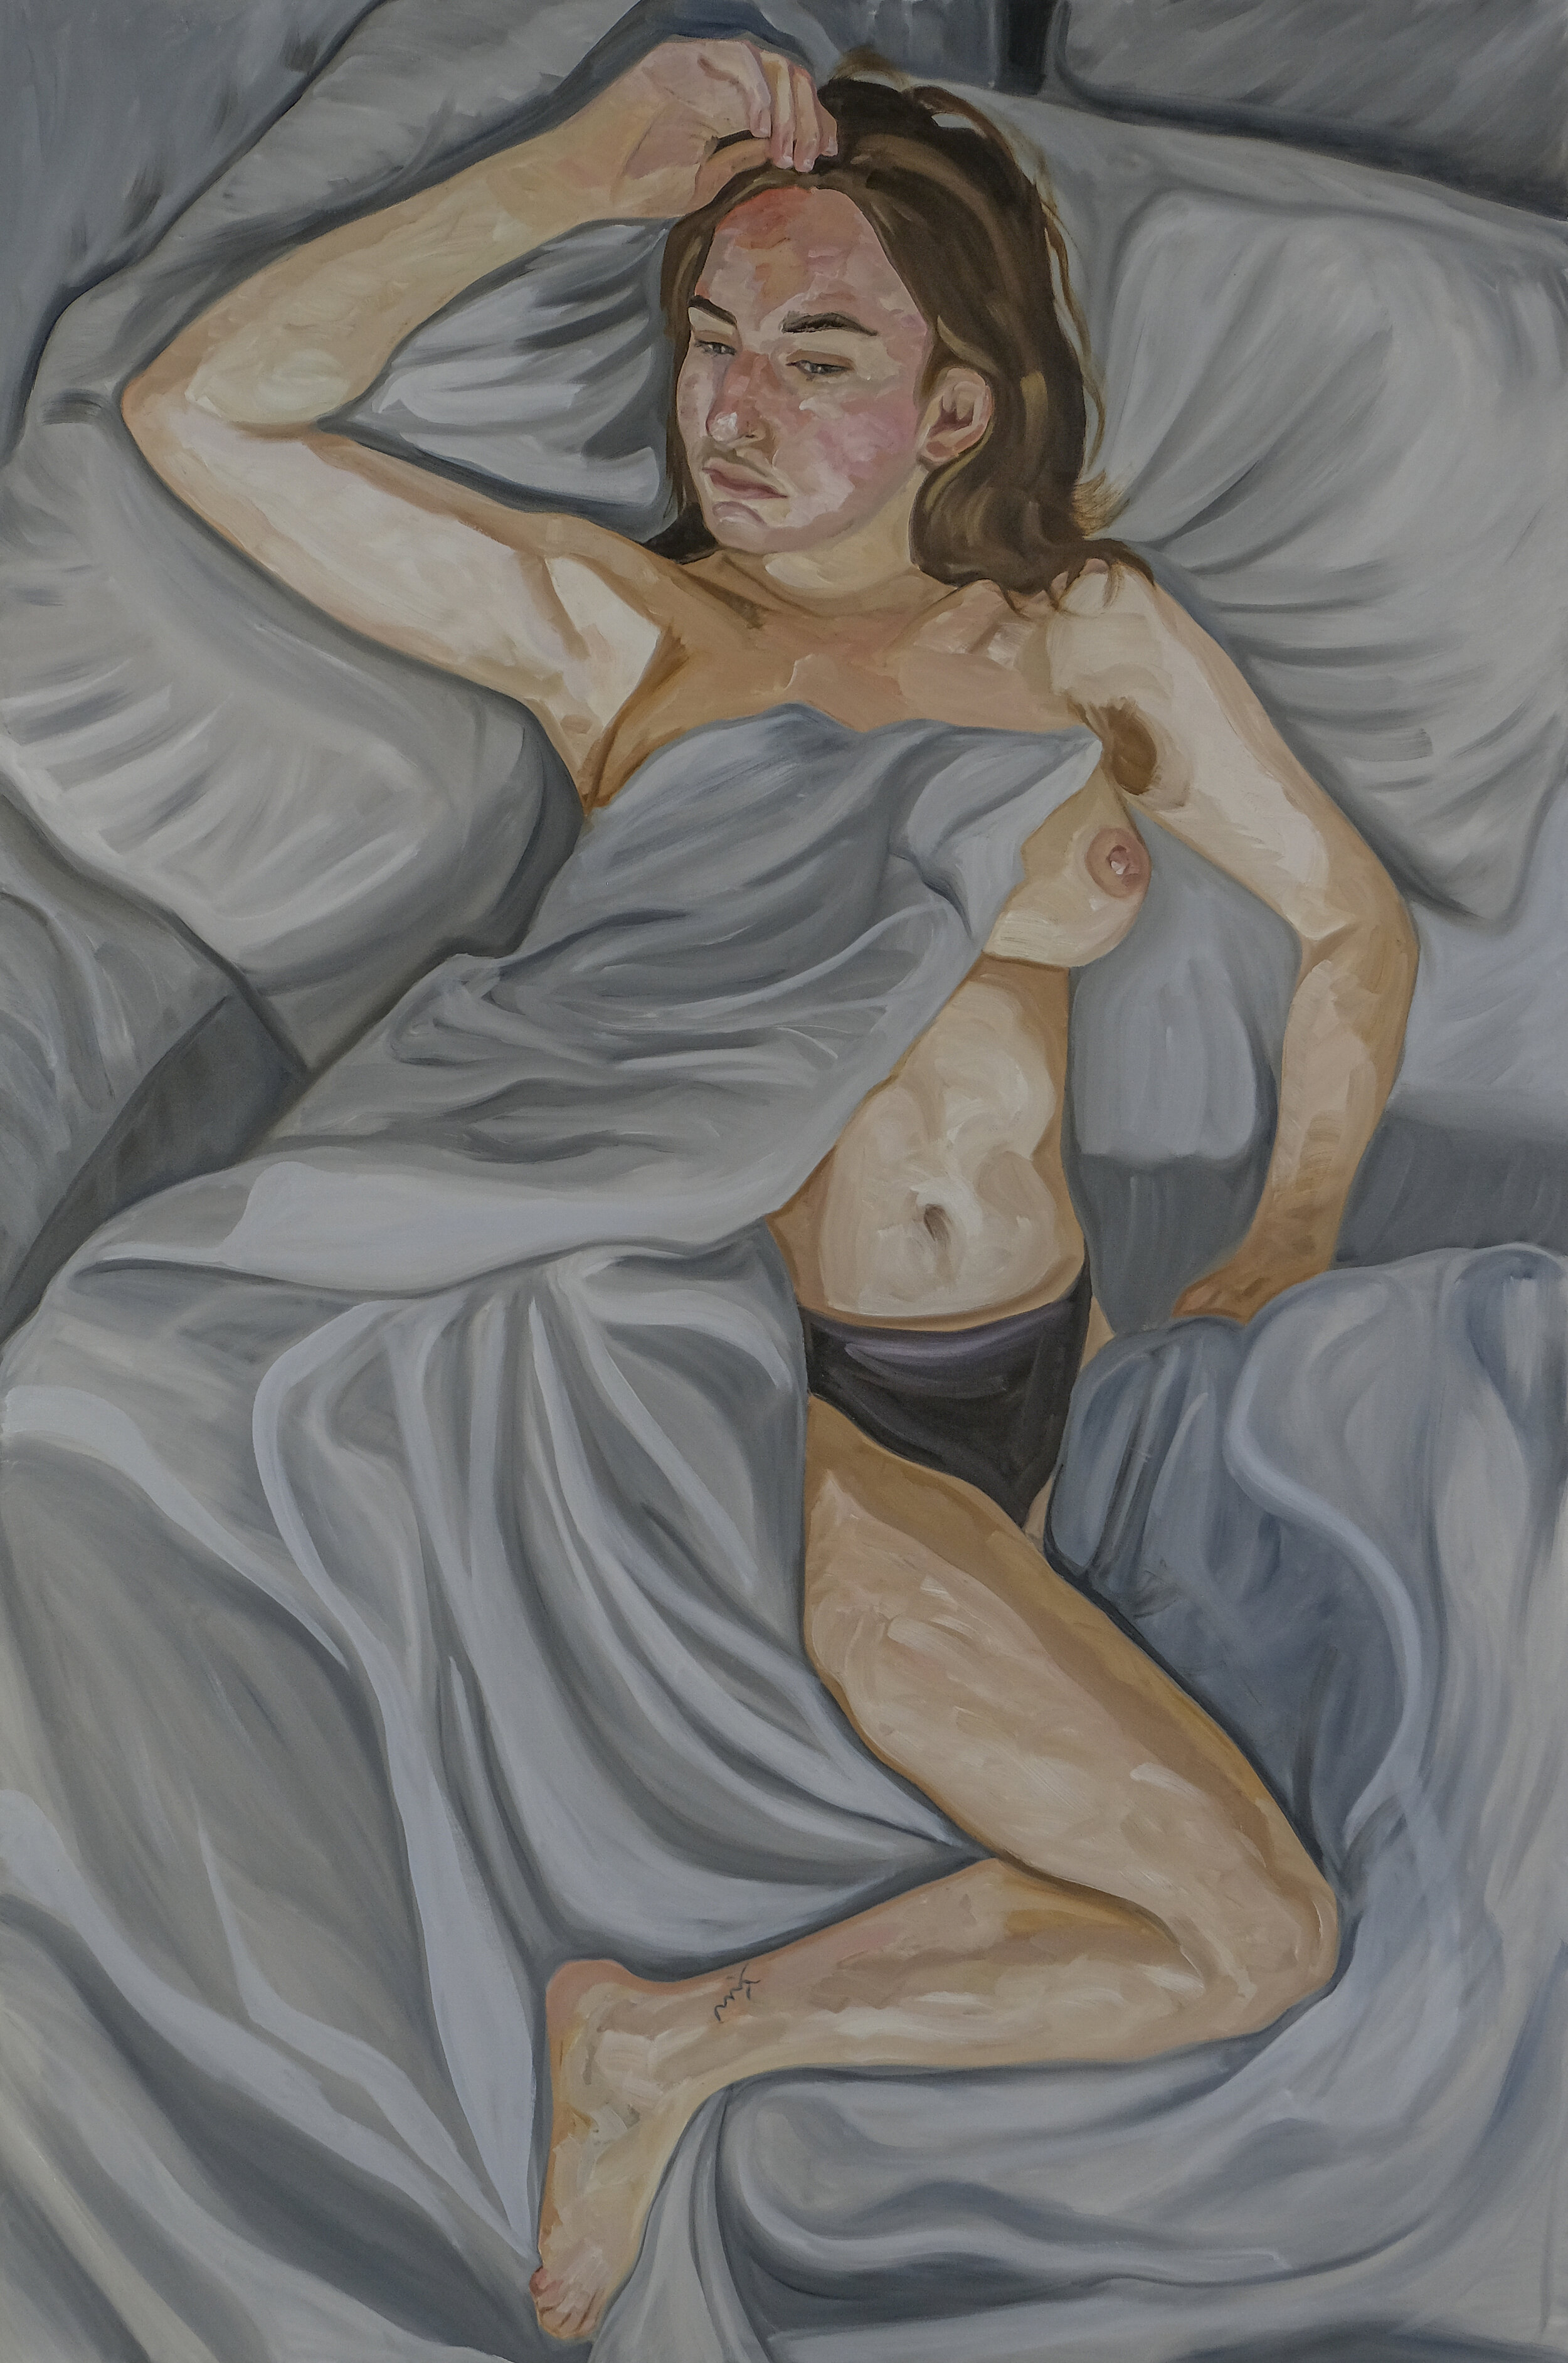   Nina Between The Sheets   2021  Oil on canvas  122cm x 183cm 